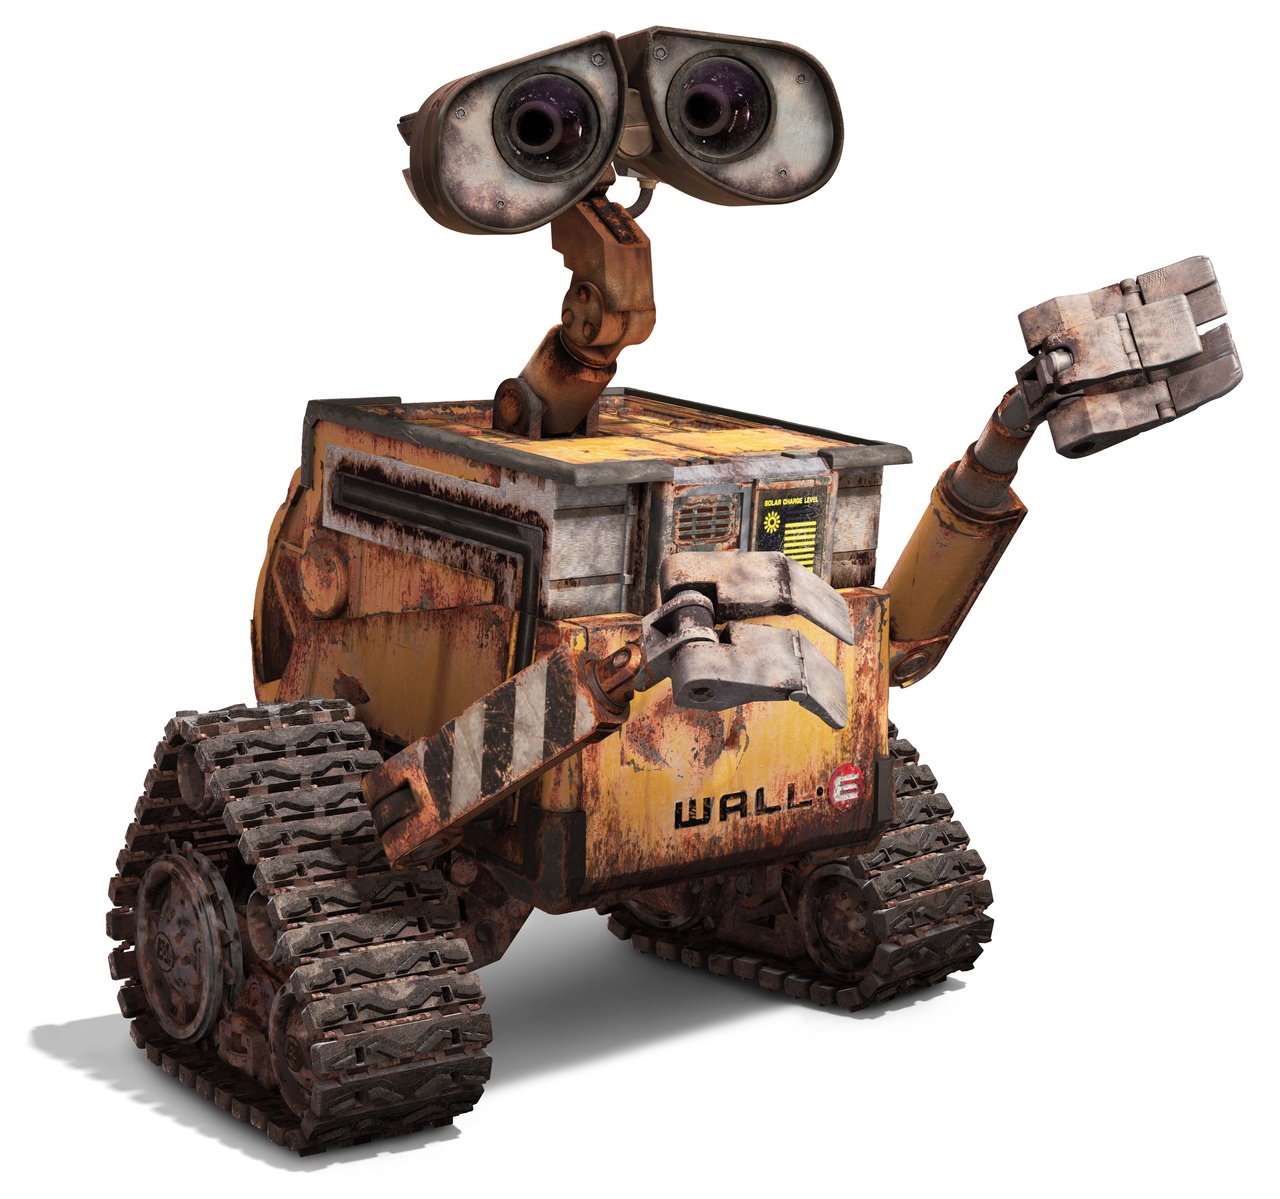 Why we think Wall-E is cute and fortune teller robots are creepy